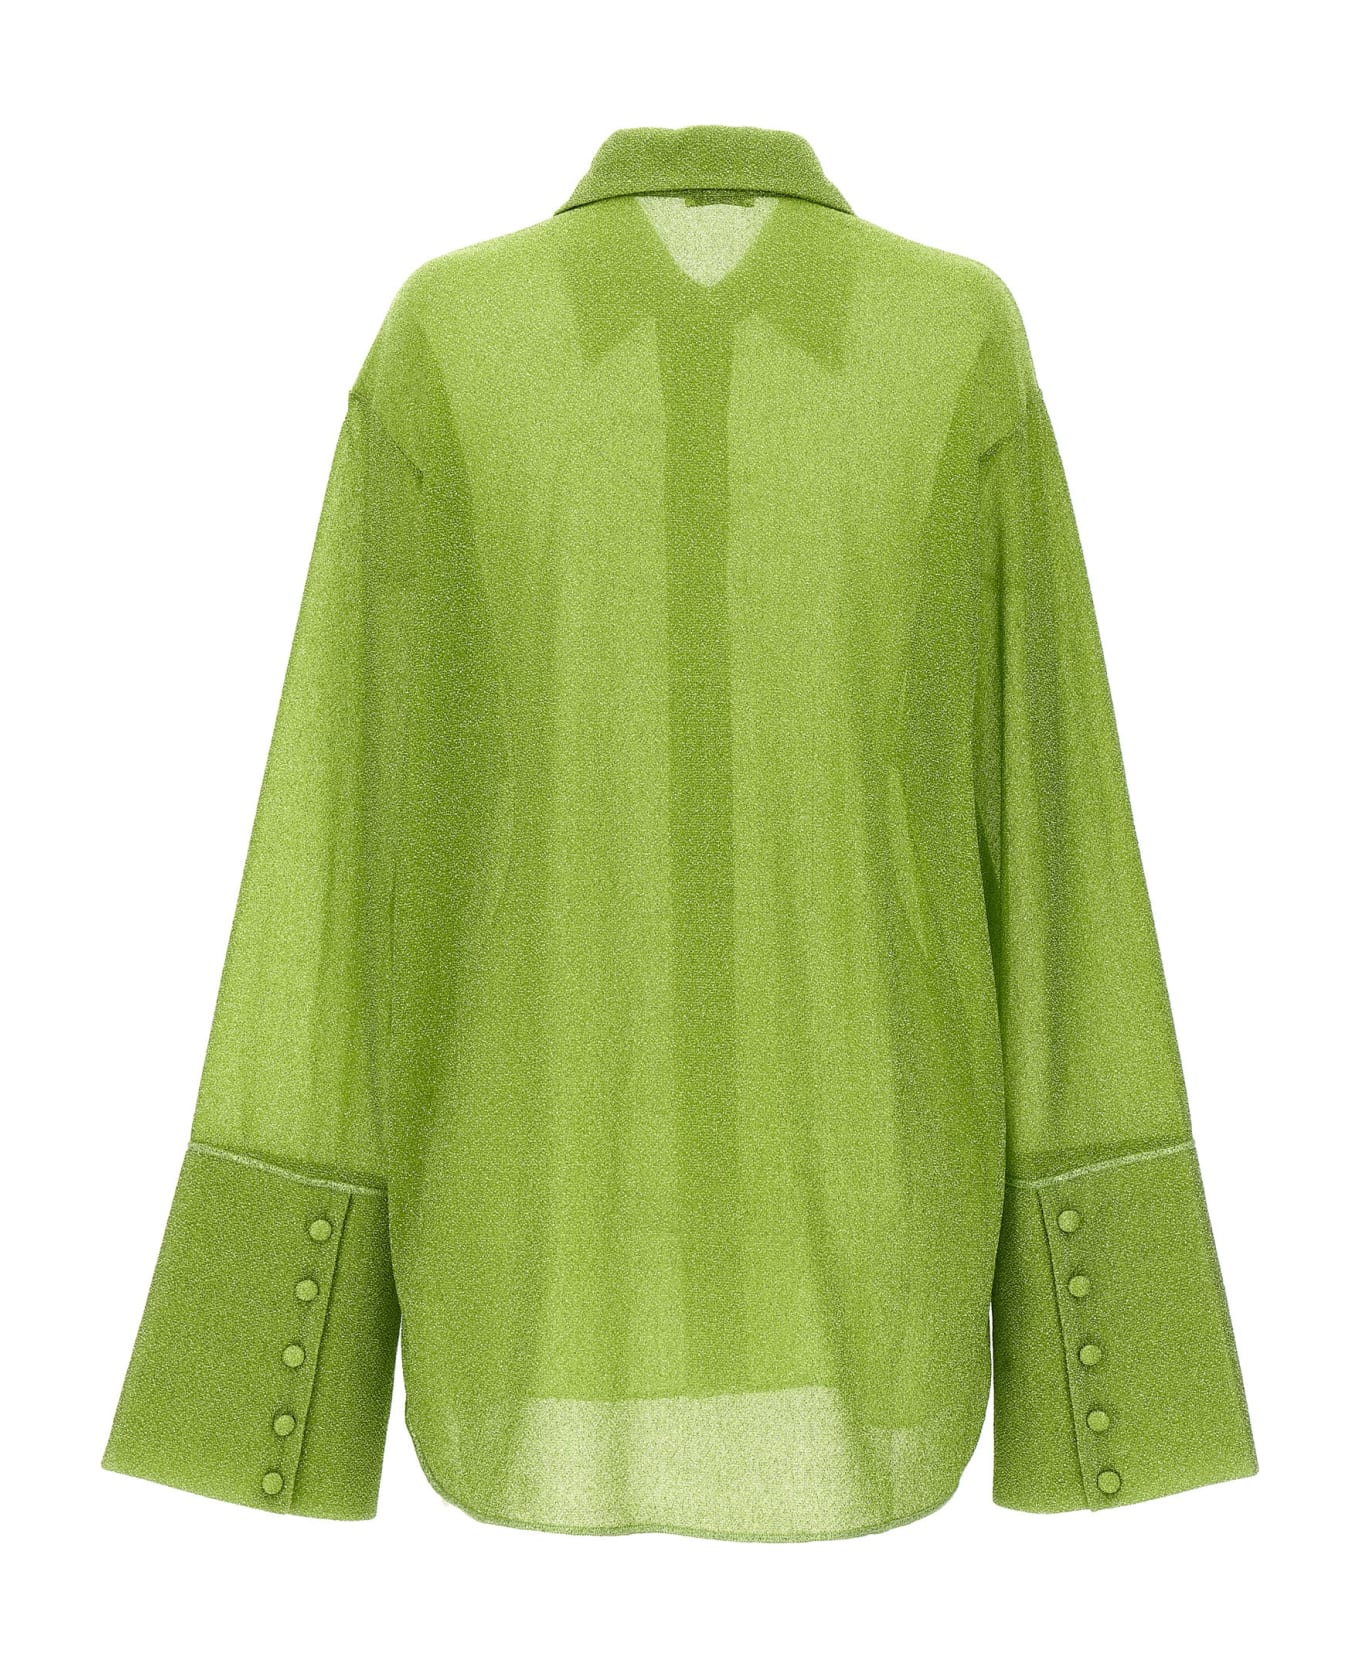 Oseree 'lumiere' Shirt - Lime